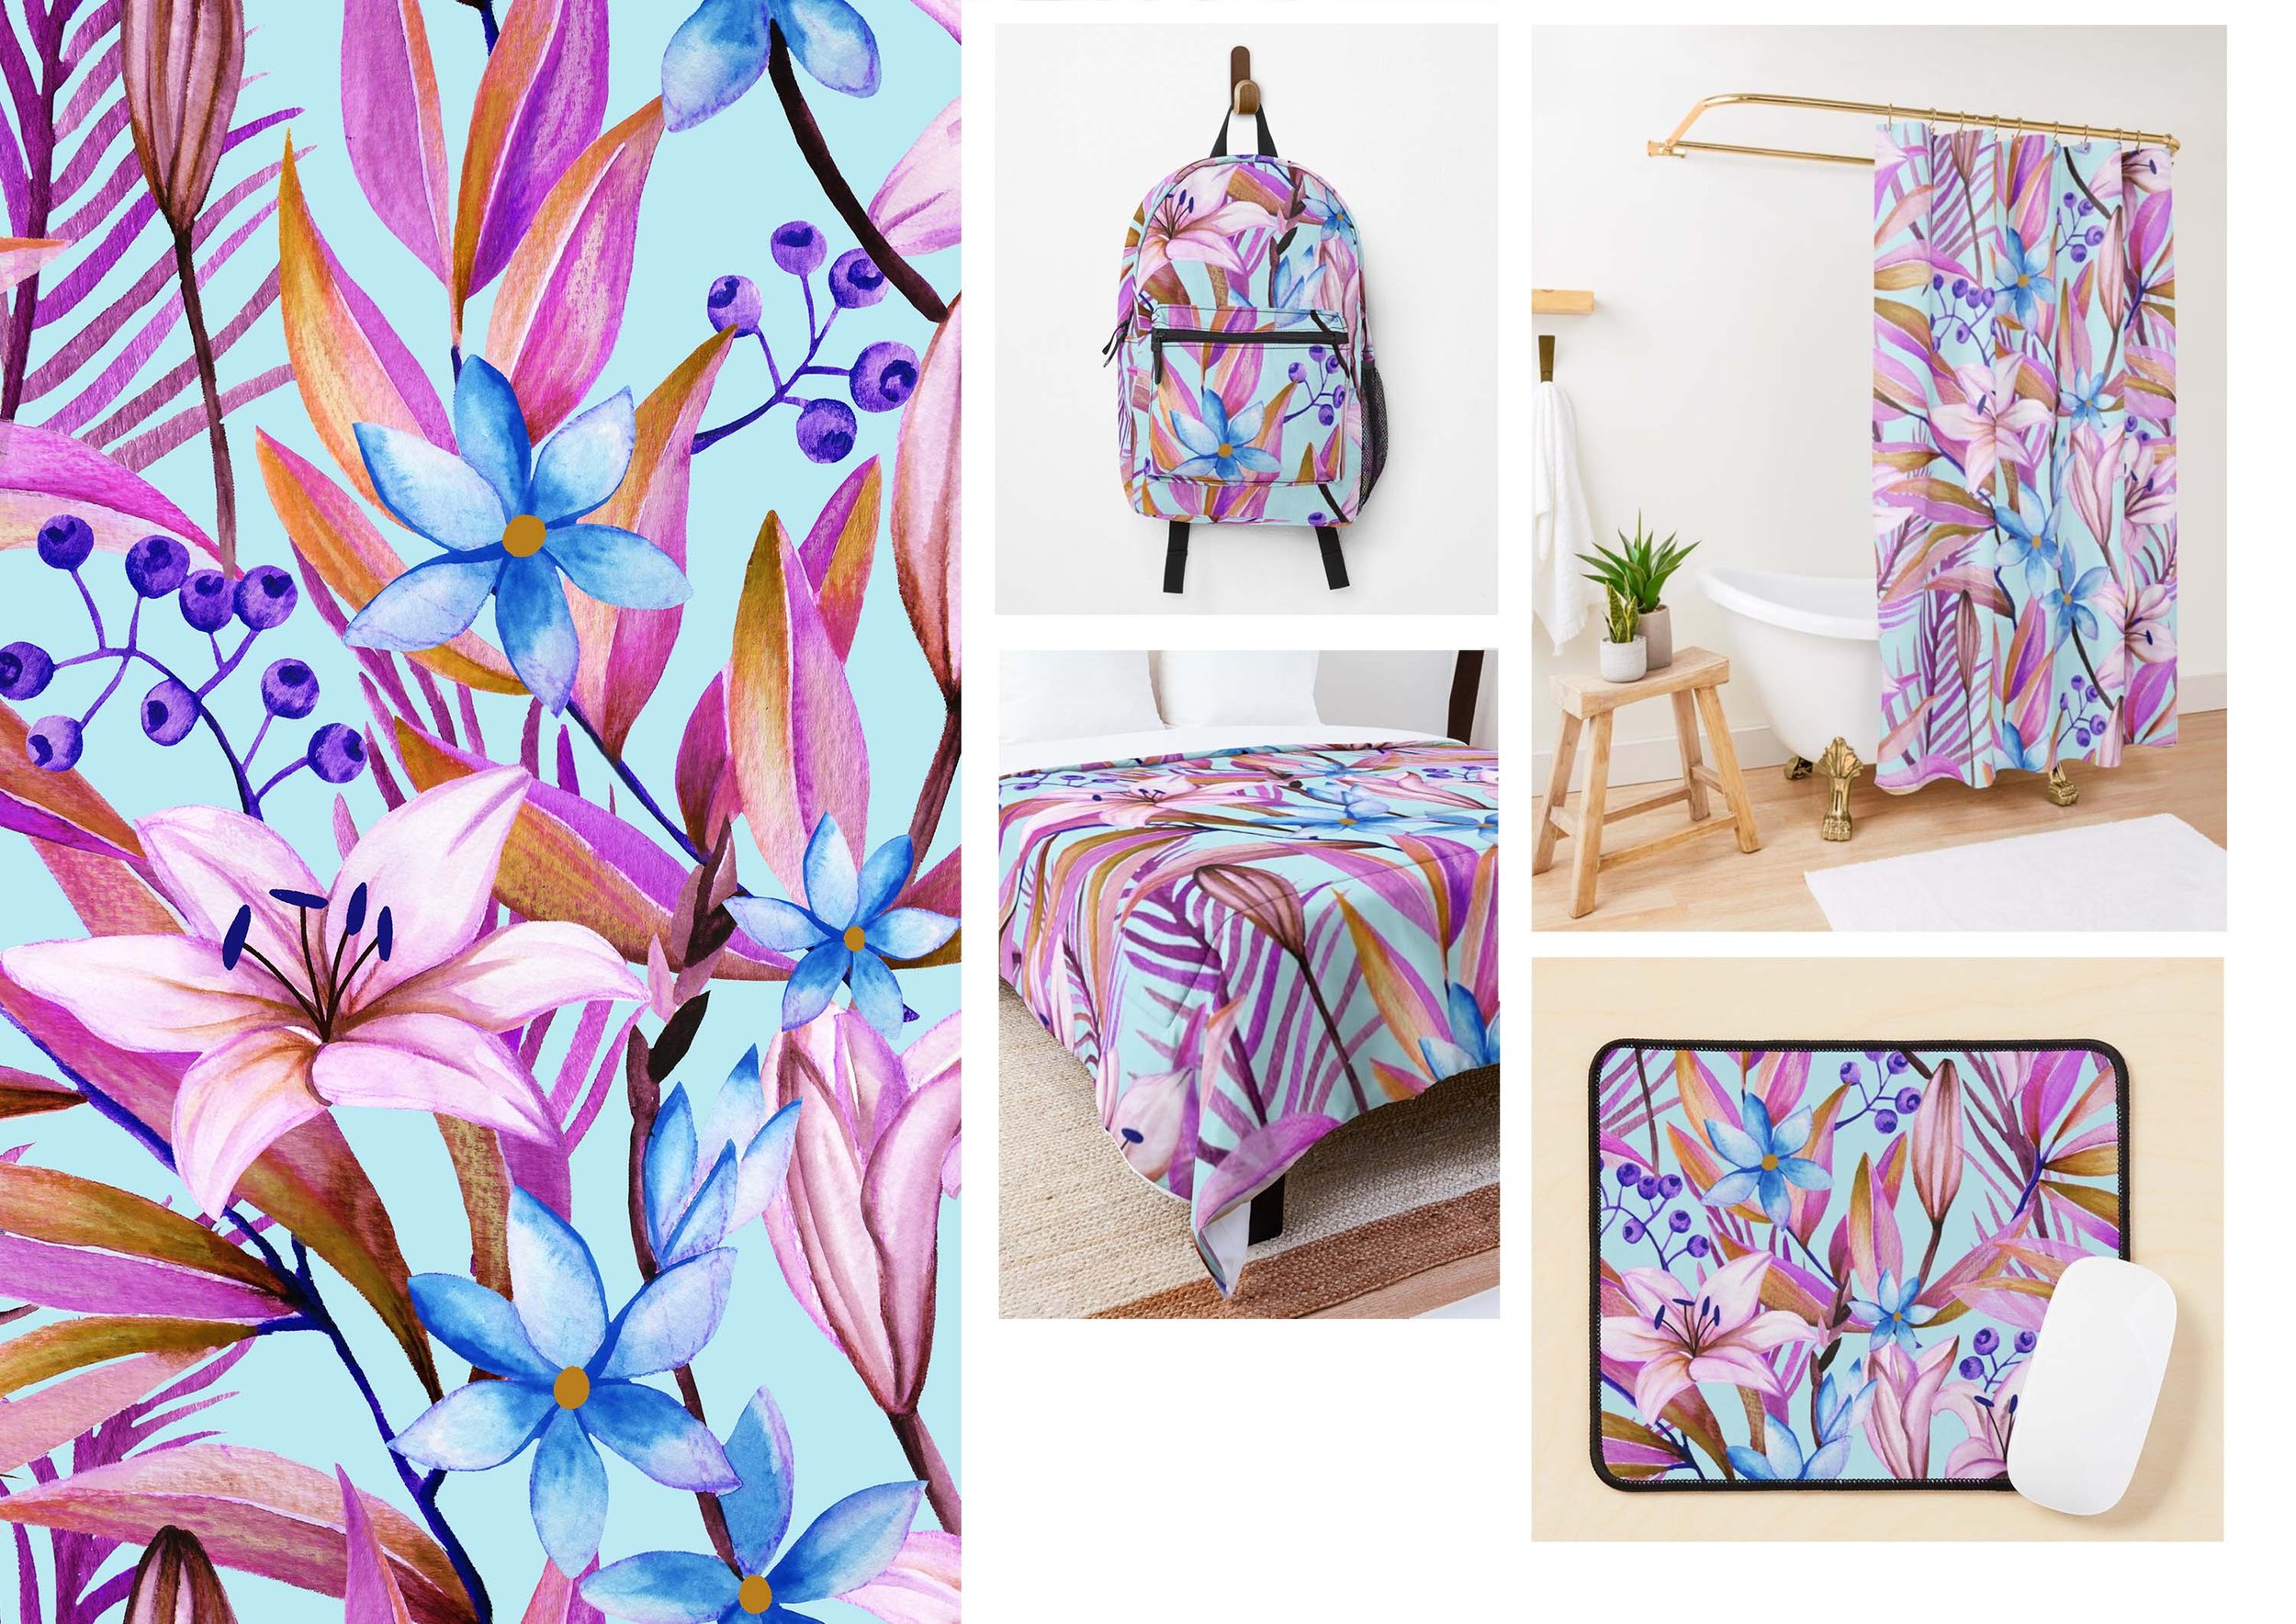 Custom Textile and Surface Pattern Designs